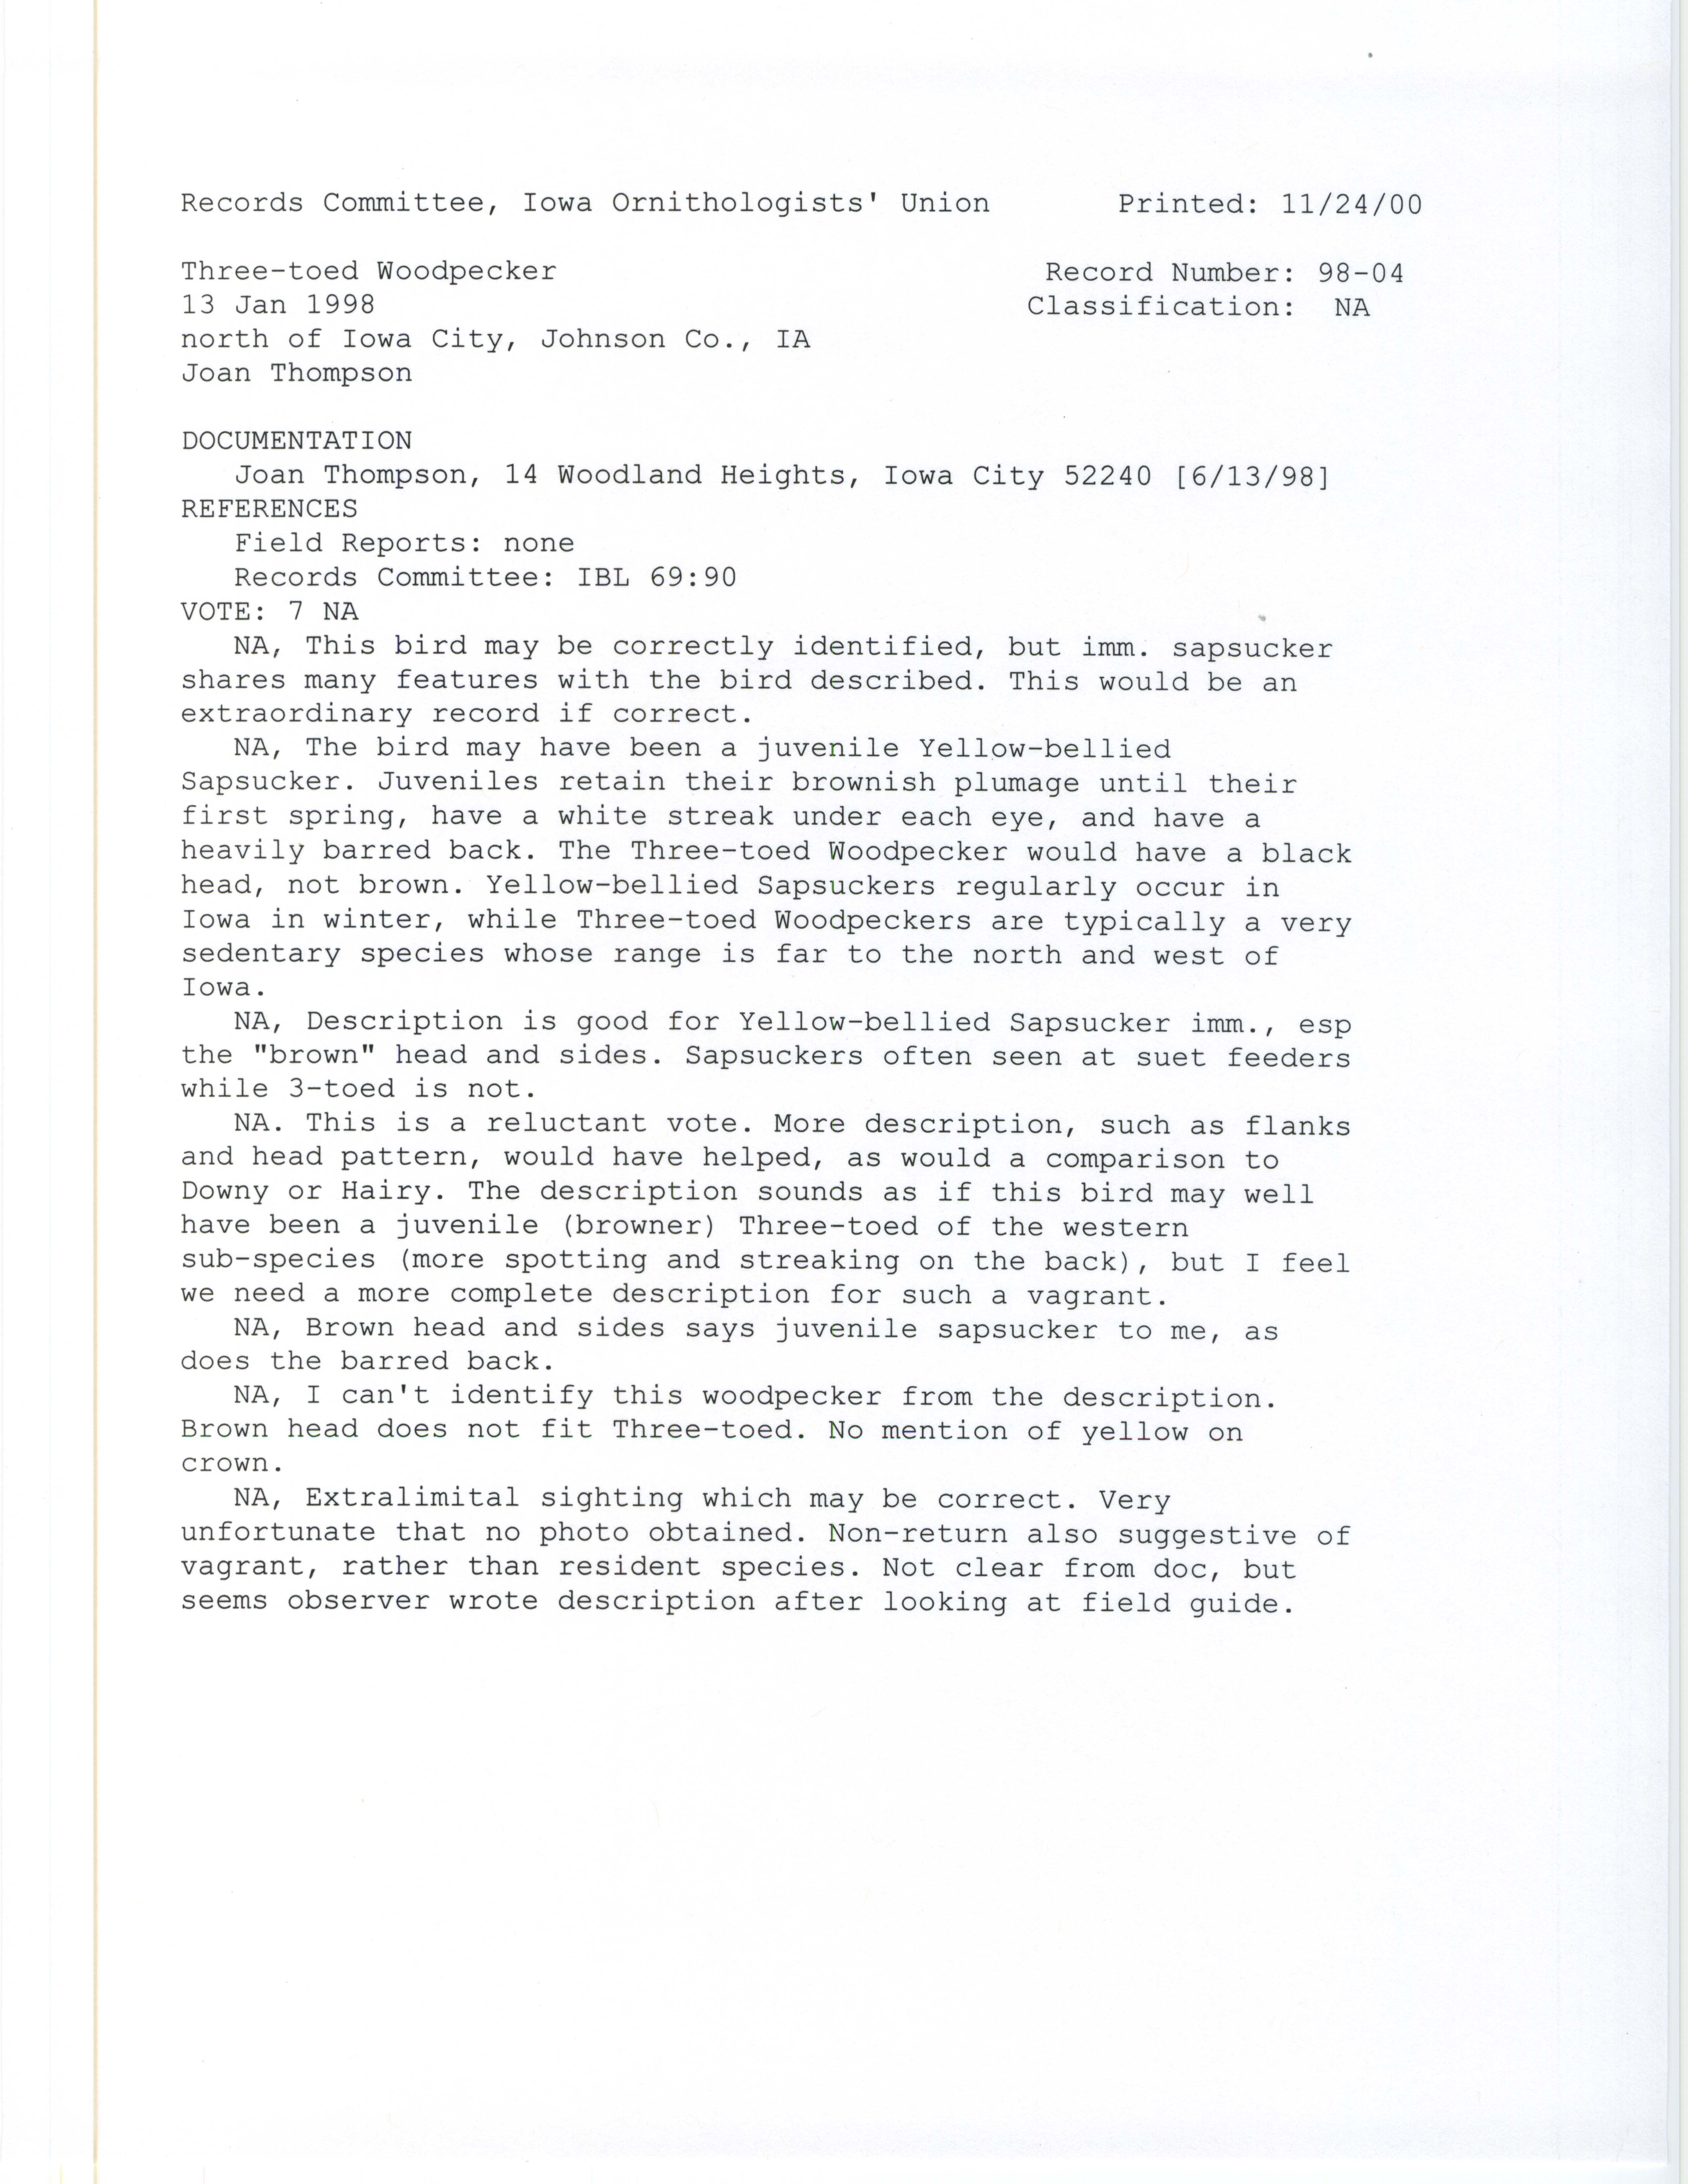 Records Committee review for rare bird sighting for Three-toed Woodpecker north of Iowa City, 1998